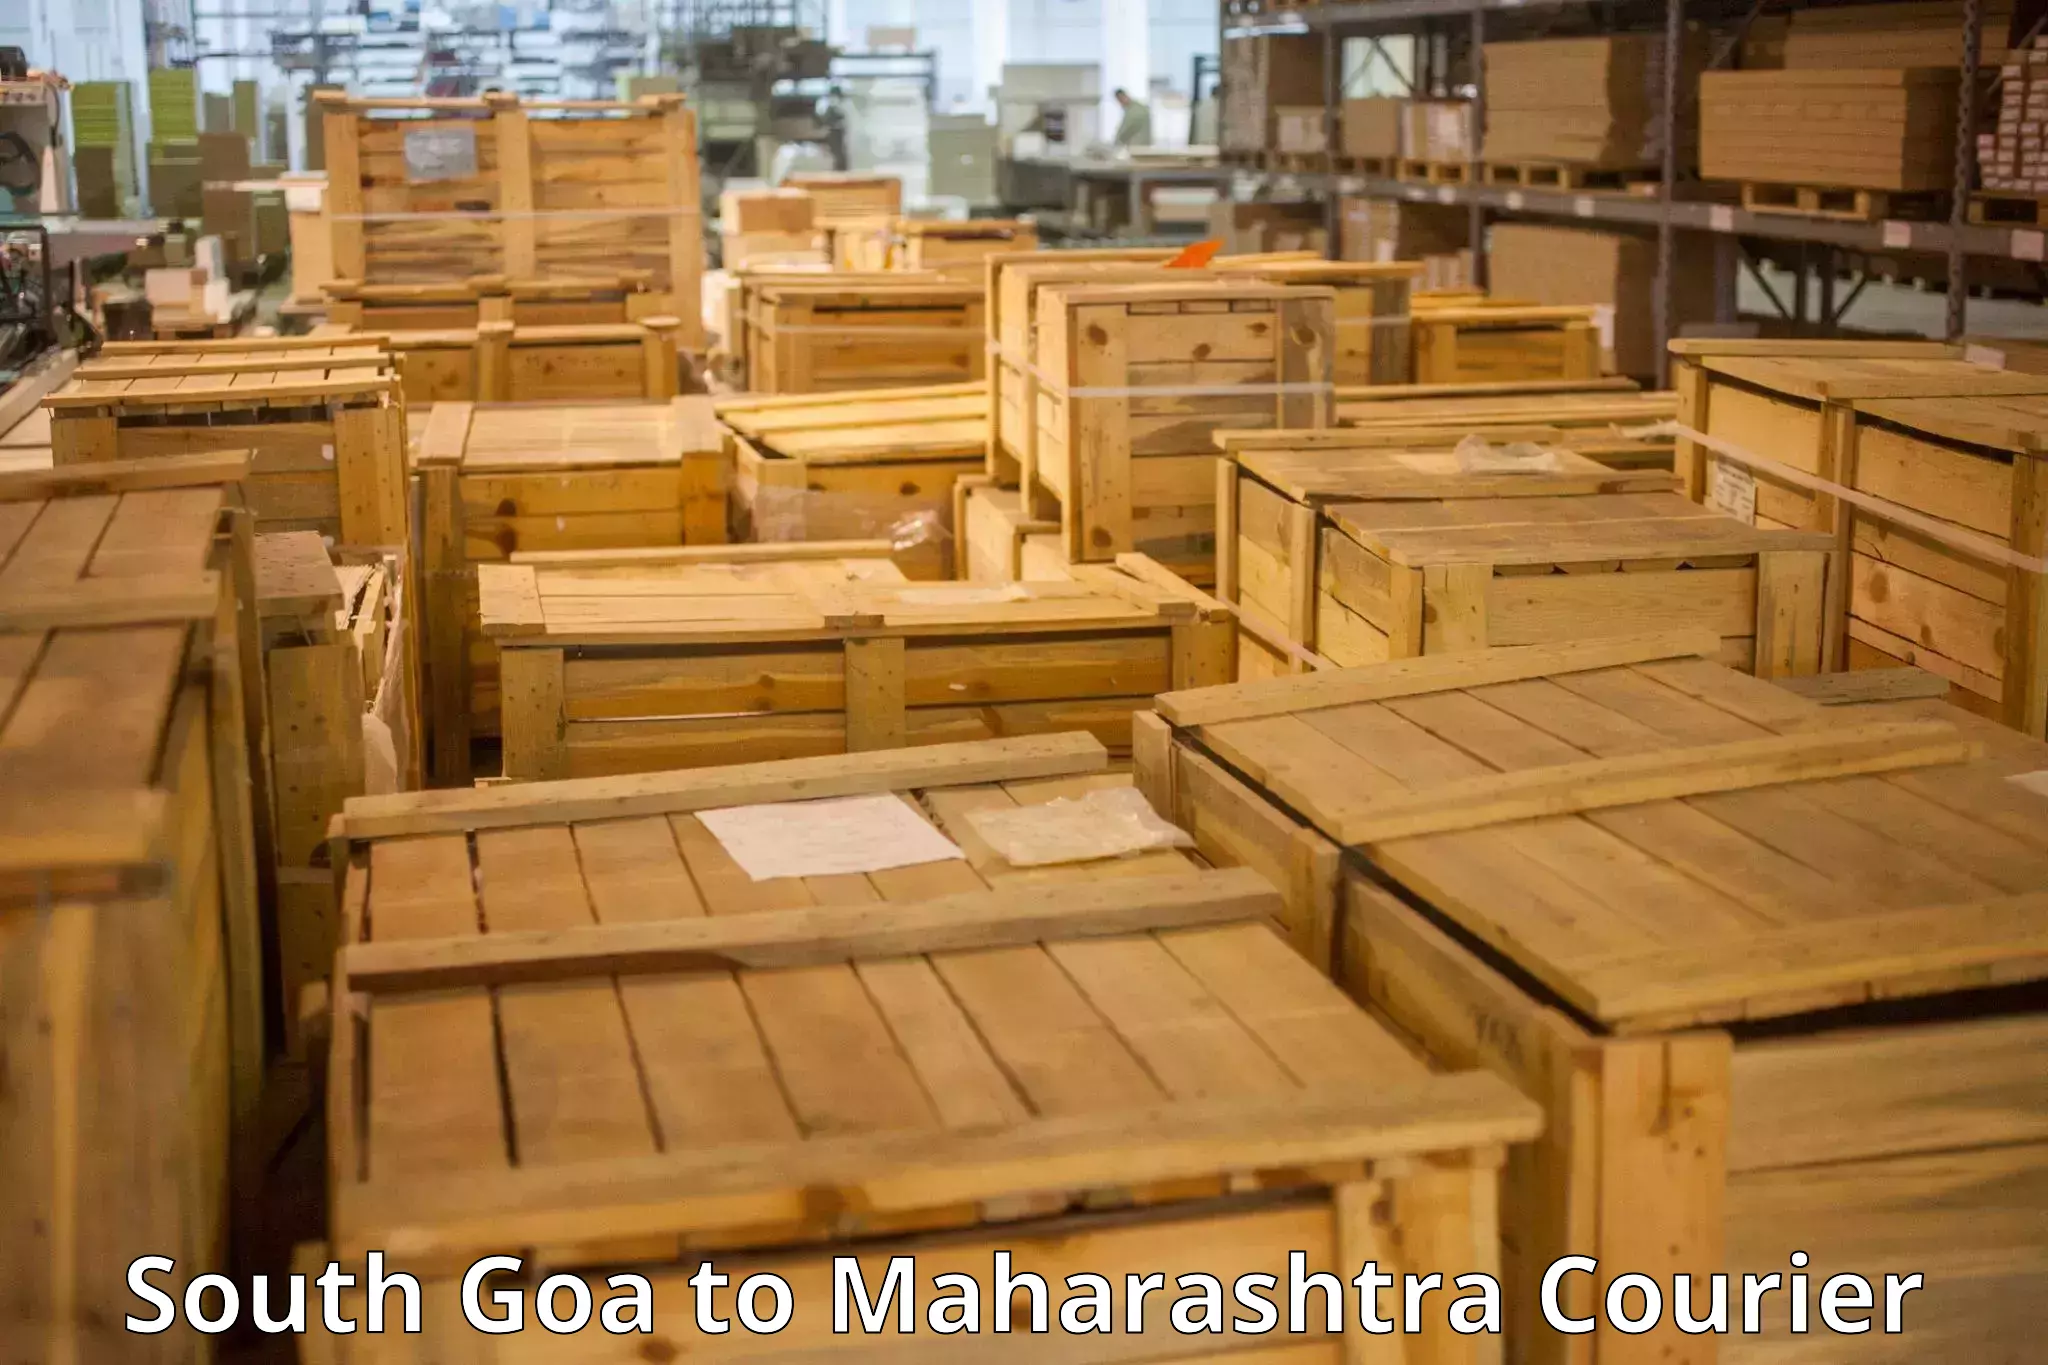 Doorstep luggage collection in South Goa to Pune